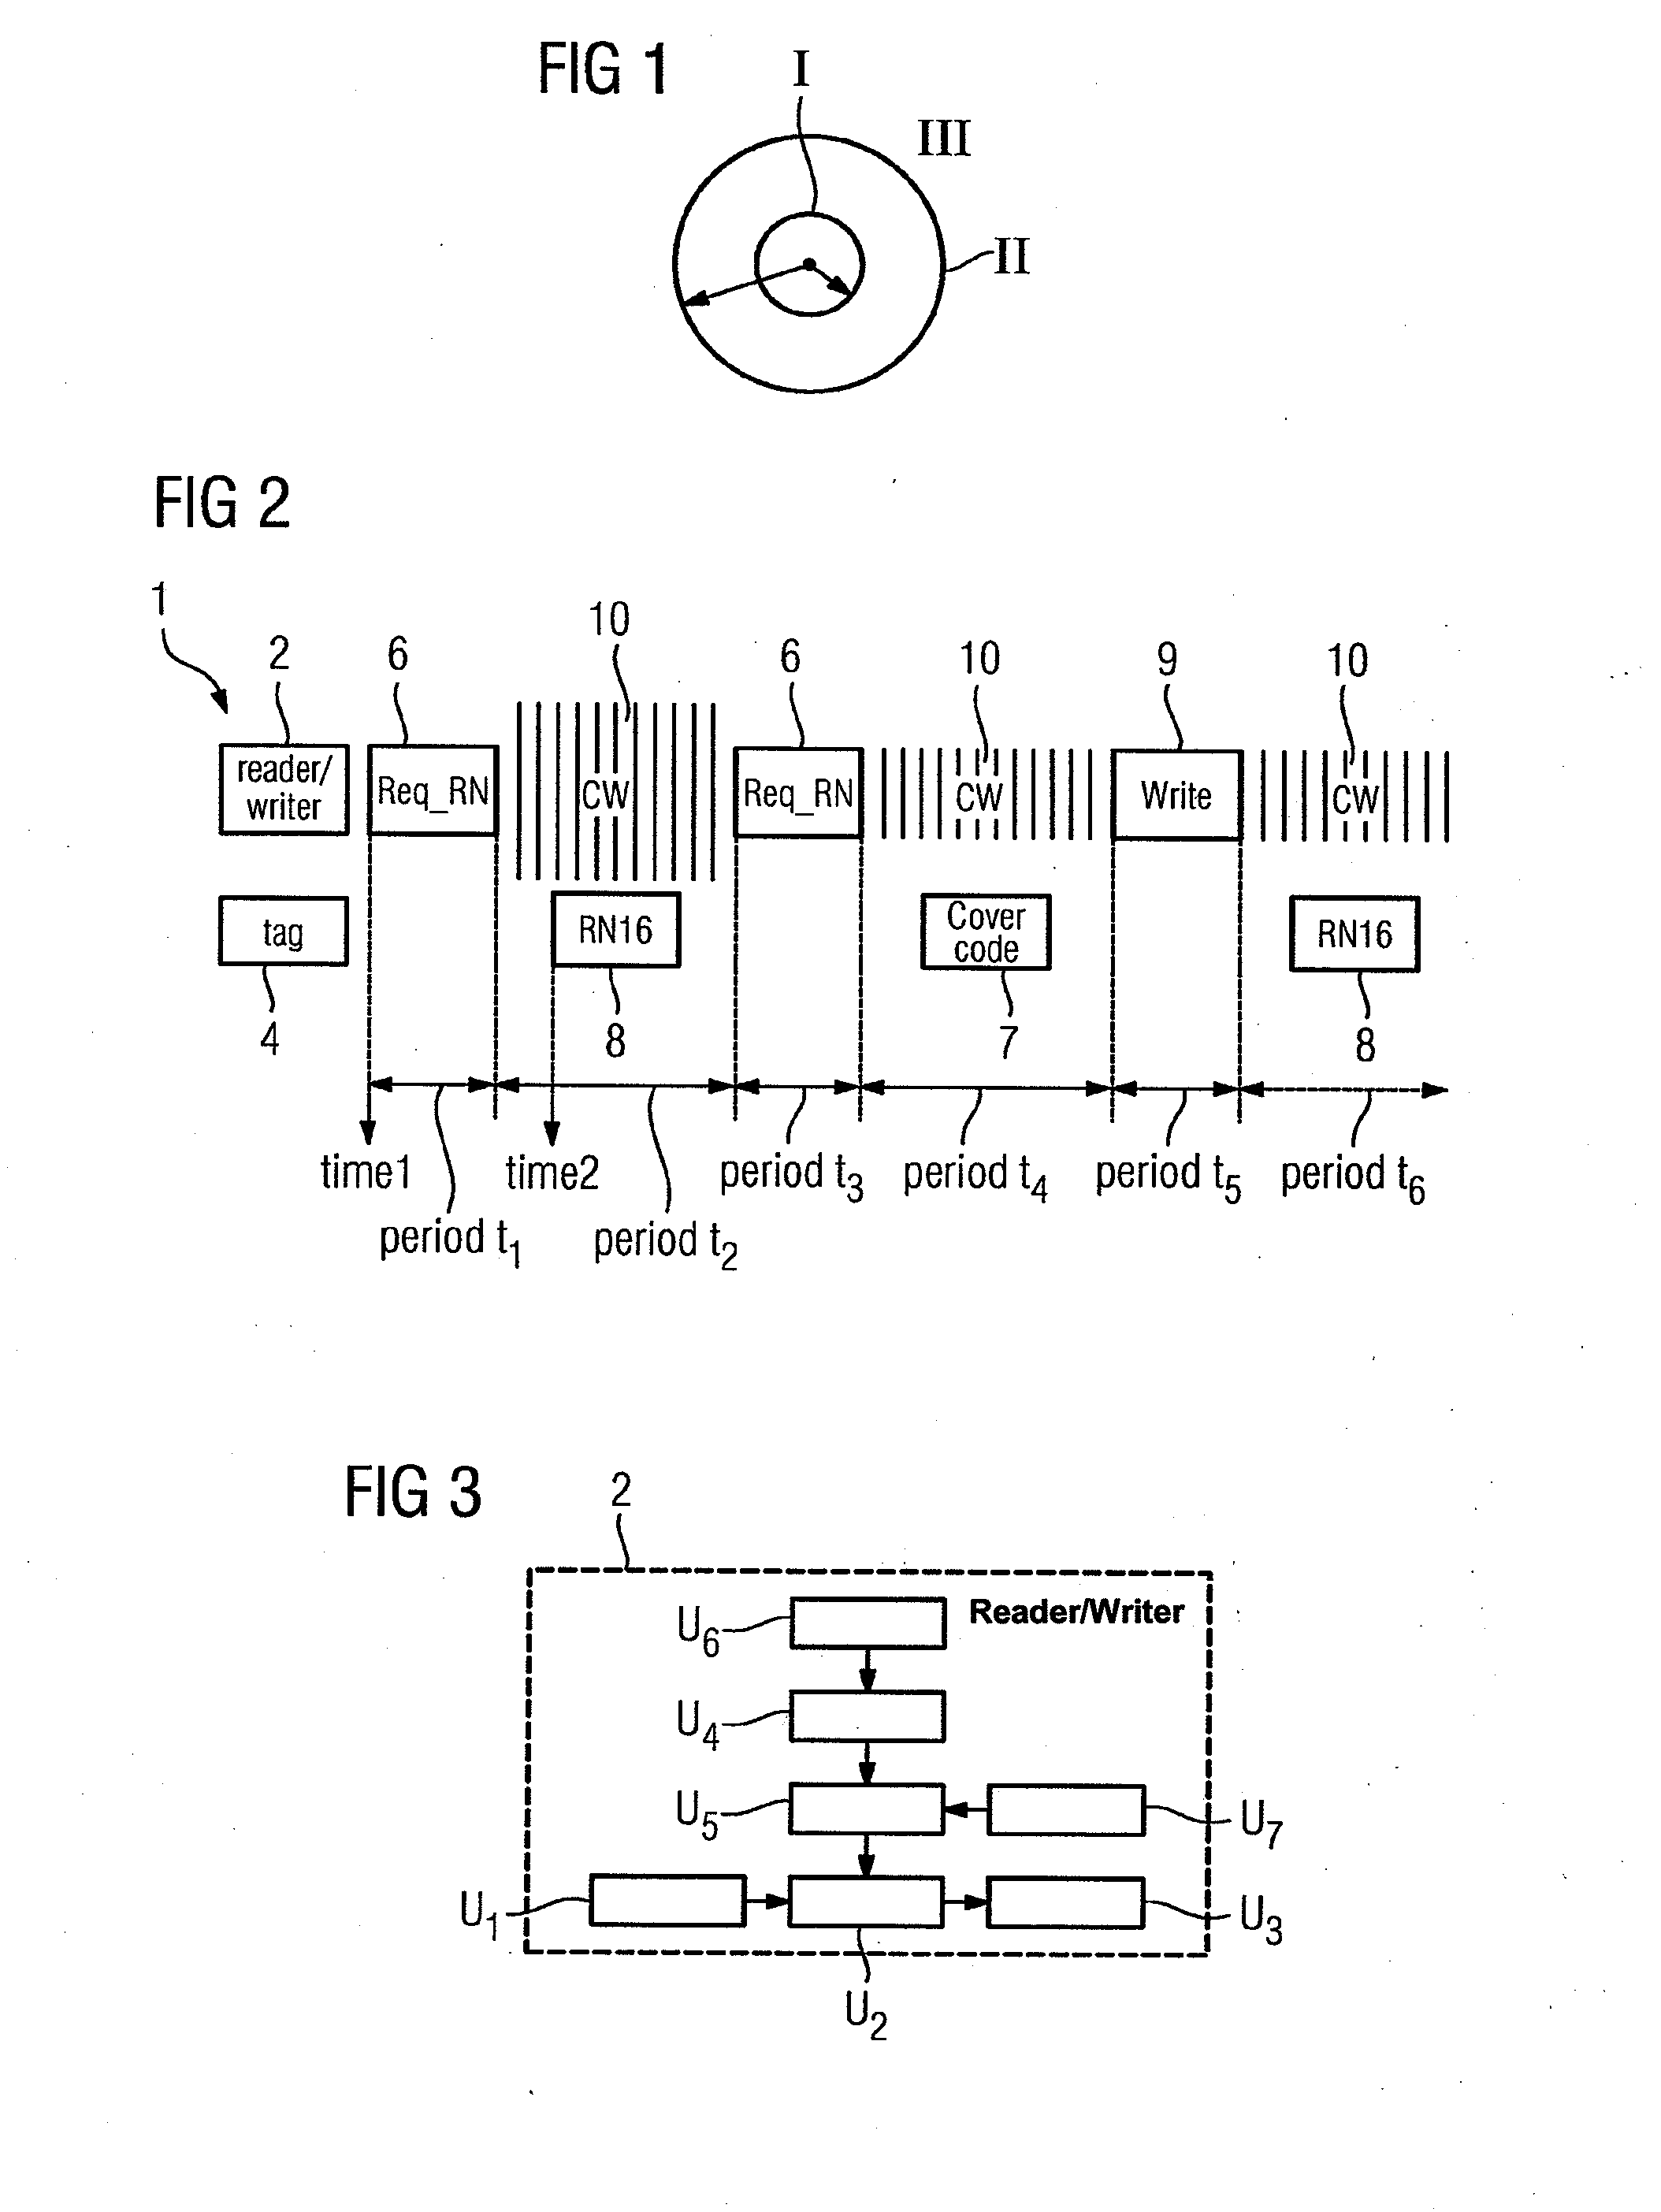 Method and Apparatus for Providing Energy to Passive Tags in a Radio-frequency Identification System